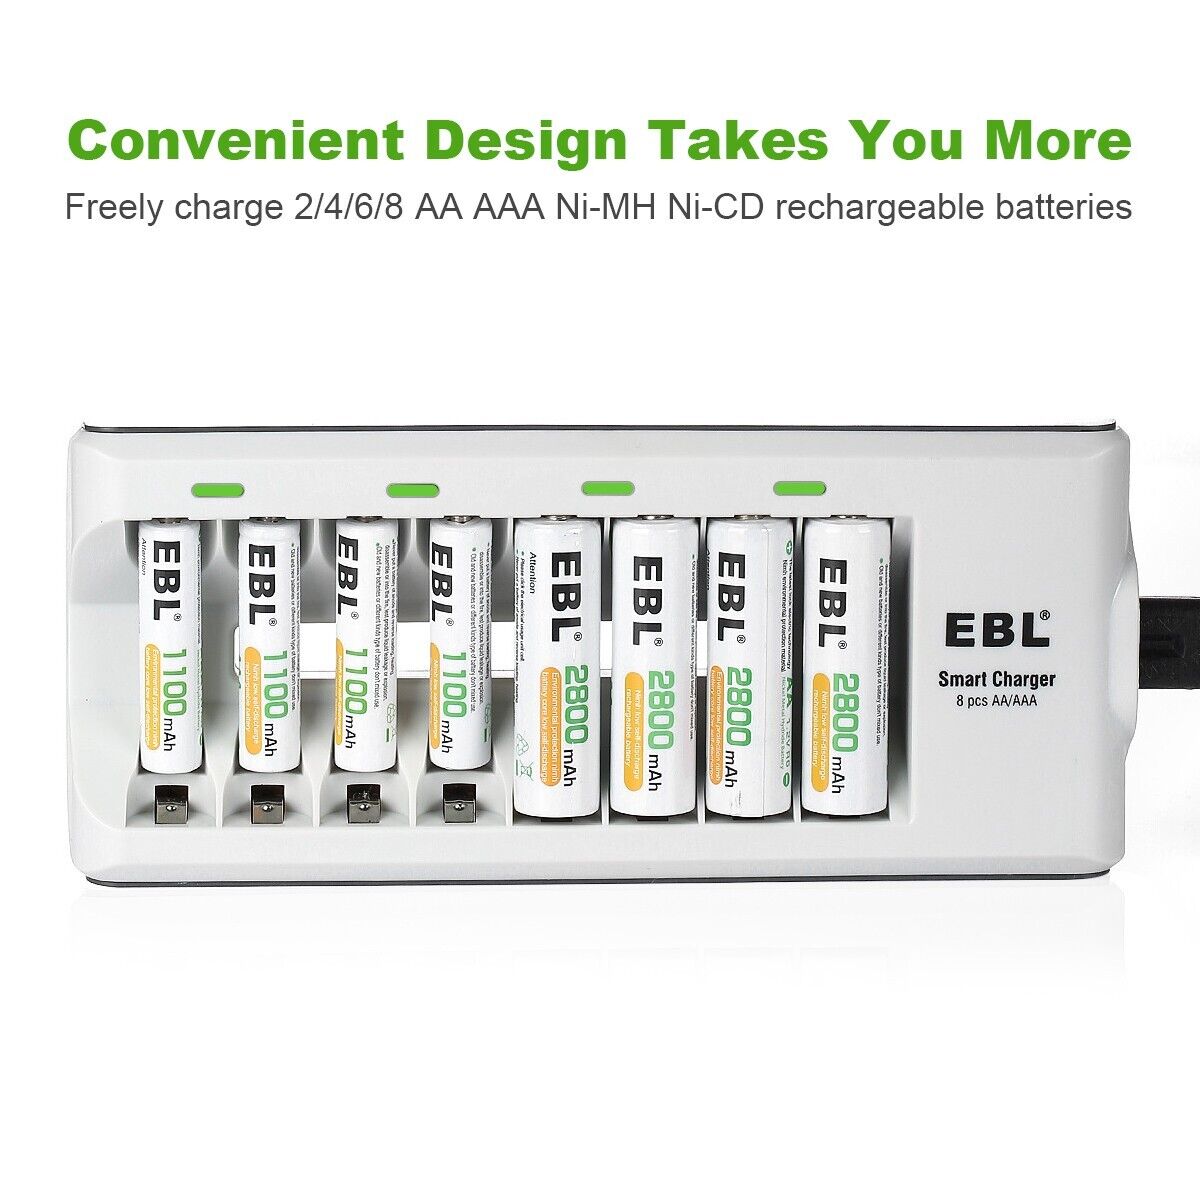 8 Bay AA AAA Independent Rechargeable Battery Charger for Ni-MH Ni-CD Batteries EBL - фотография #4